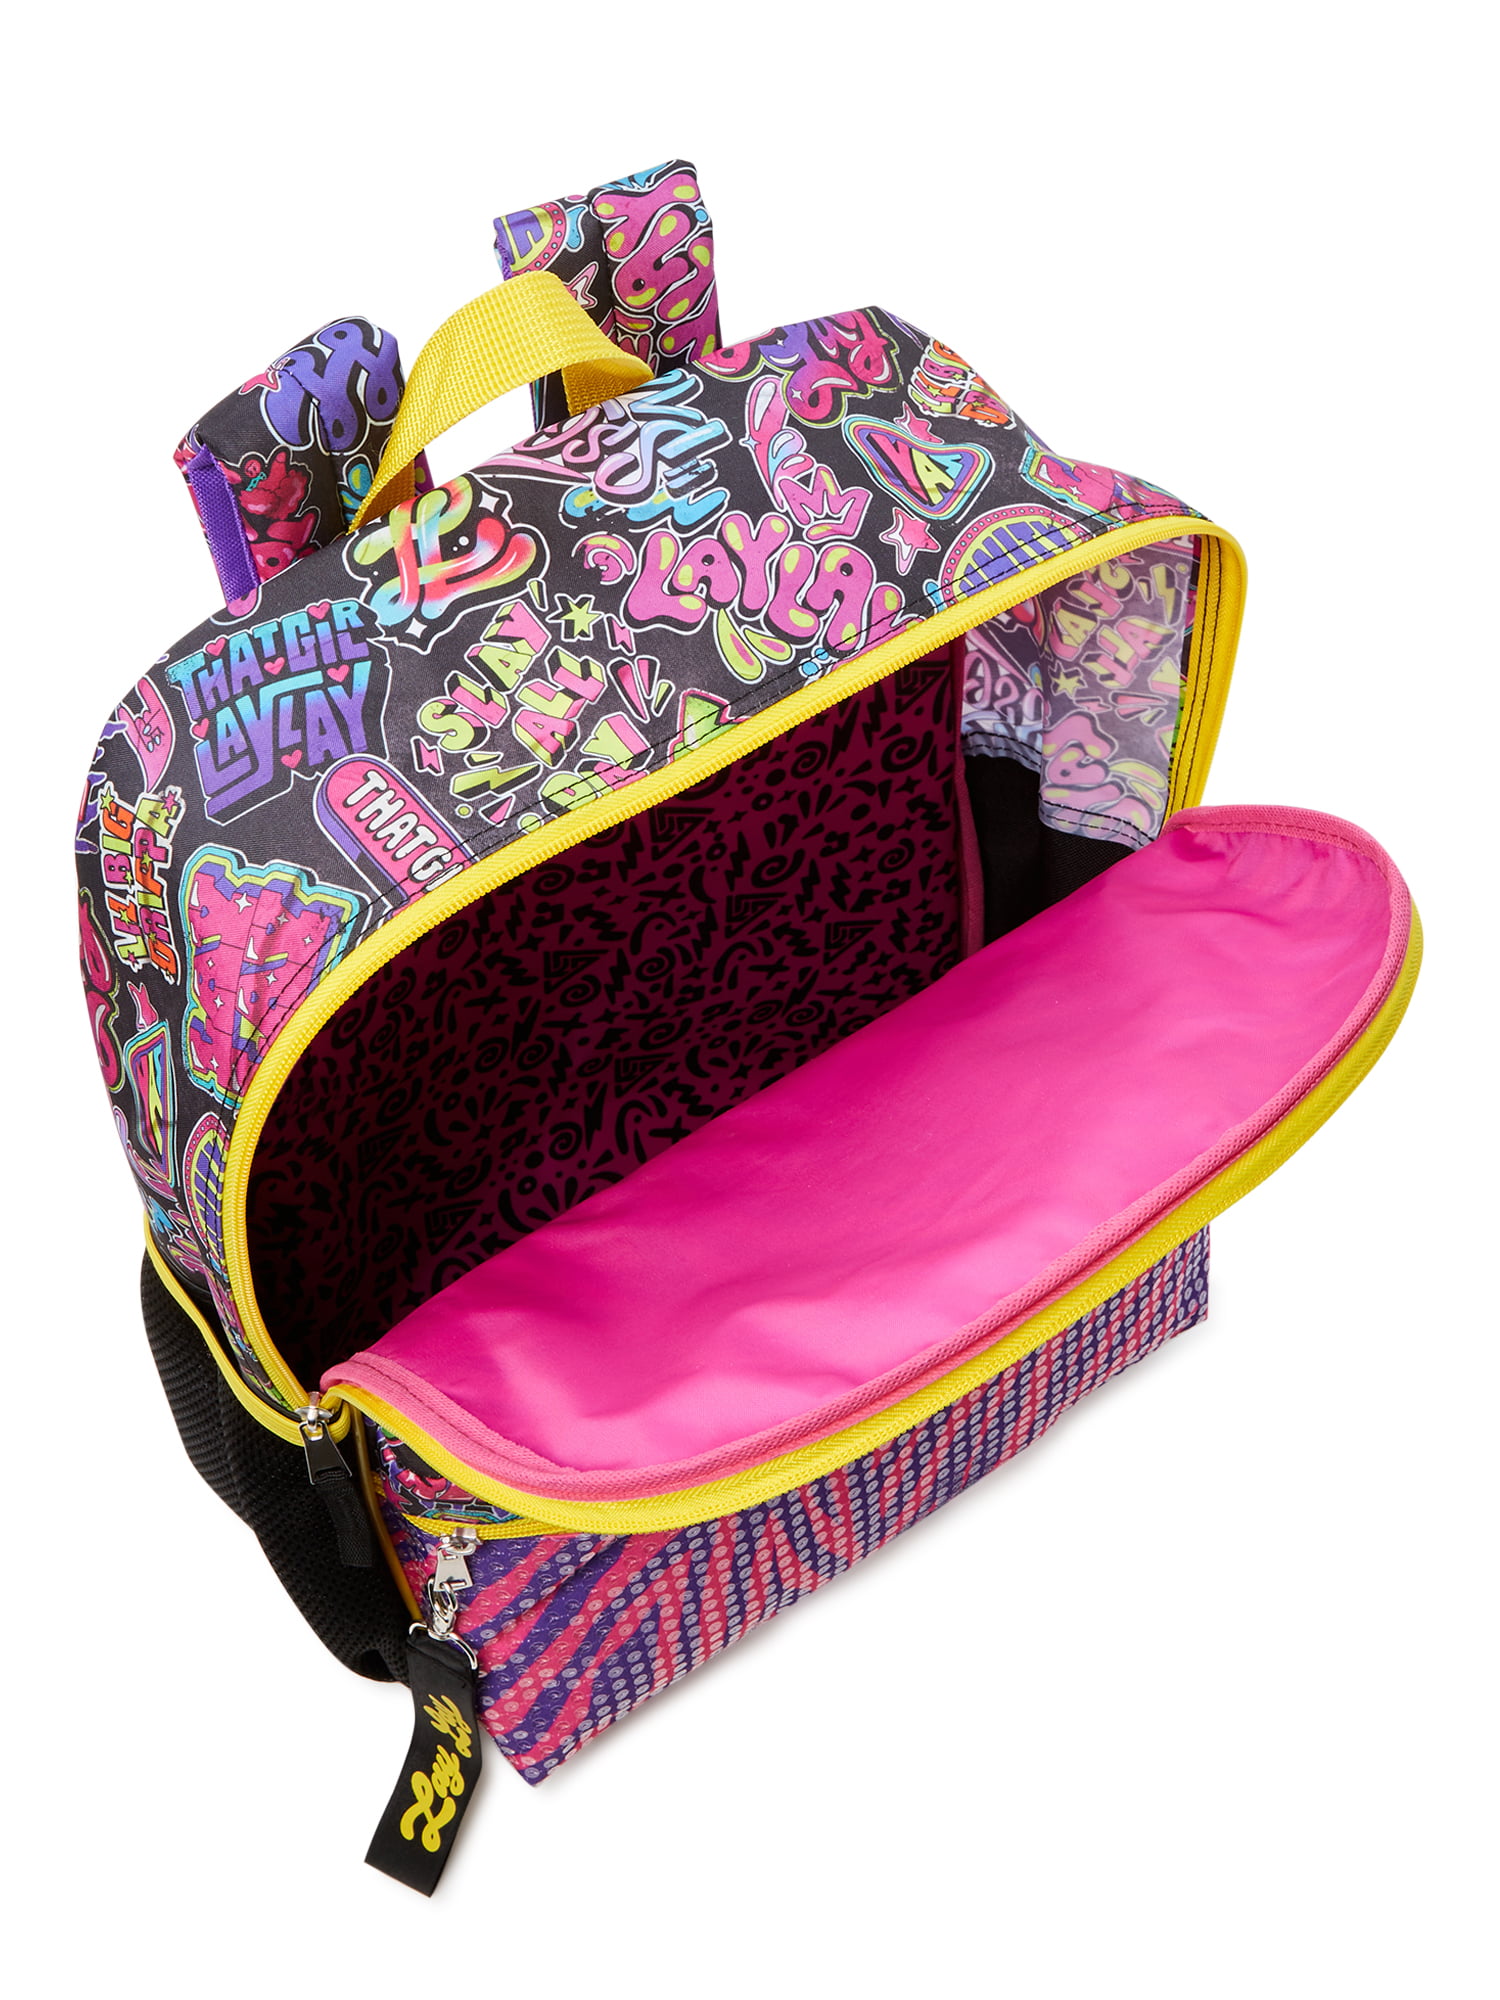 That Girl Lay Lay Lunchbox - Purple/Multi, One Size